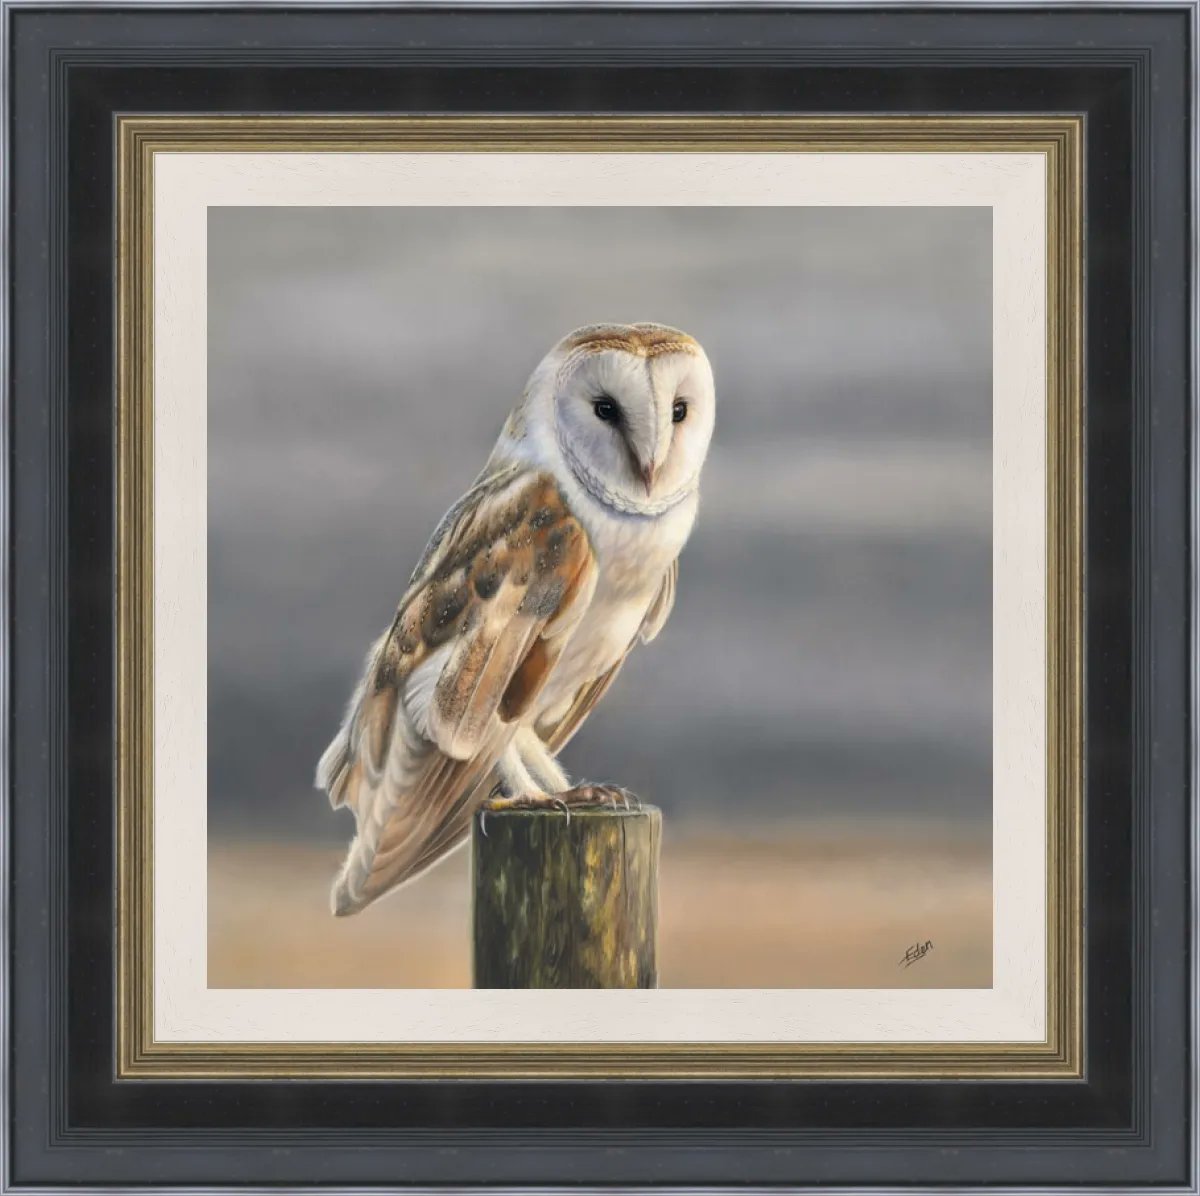 My owl painting 'Serenity' has now been turned into a beautiful varnished canvas print and is available in a choice of two frames. This is a limited edition series of only 95 copies and forms part of a collection of 4 pieces.

#owl #barnowl #owlpainting #ukwildlife #wildlifeart